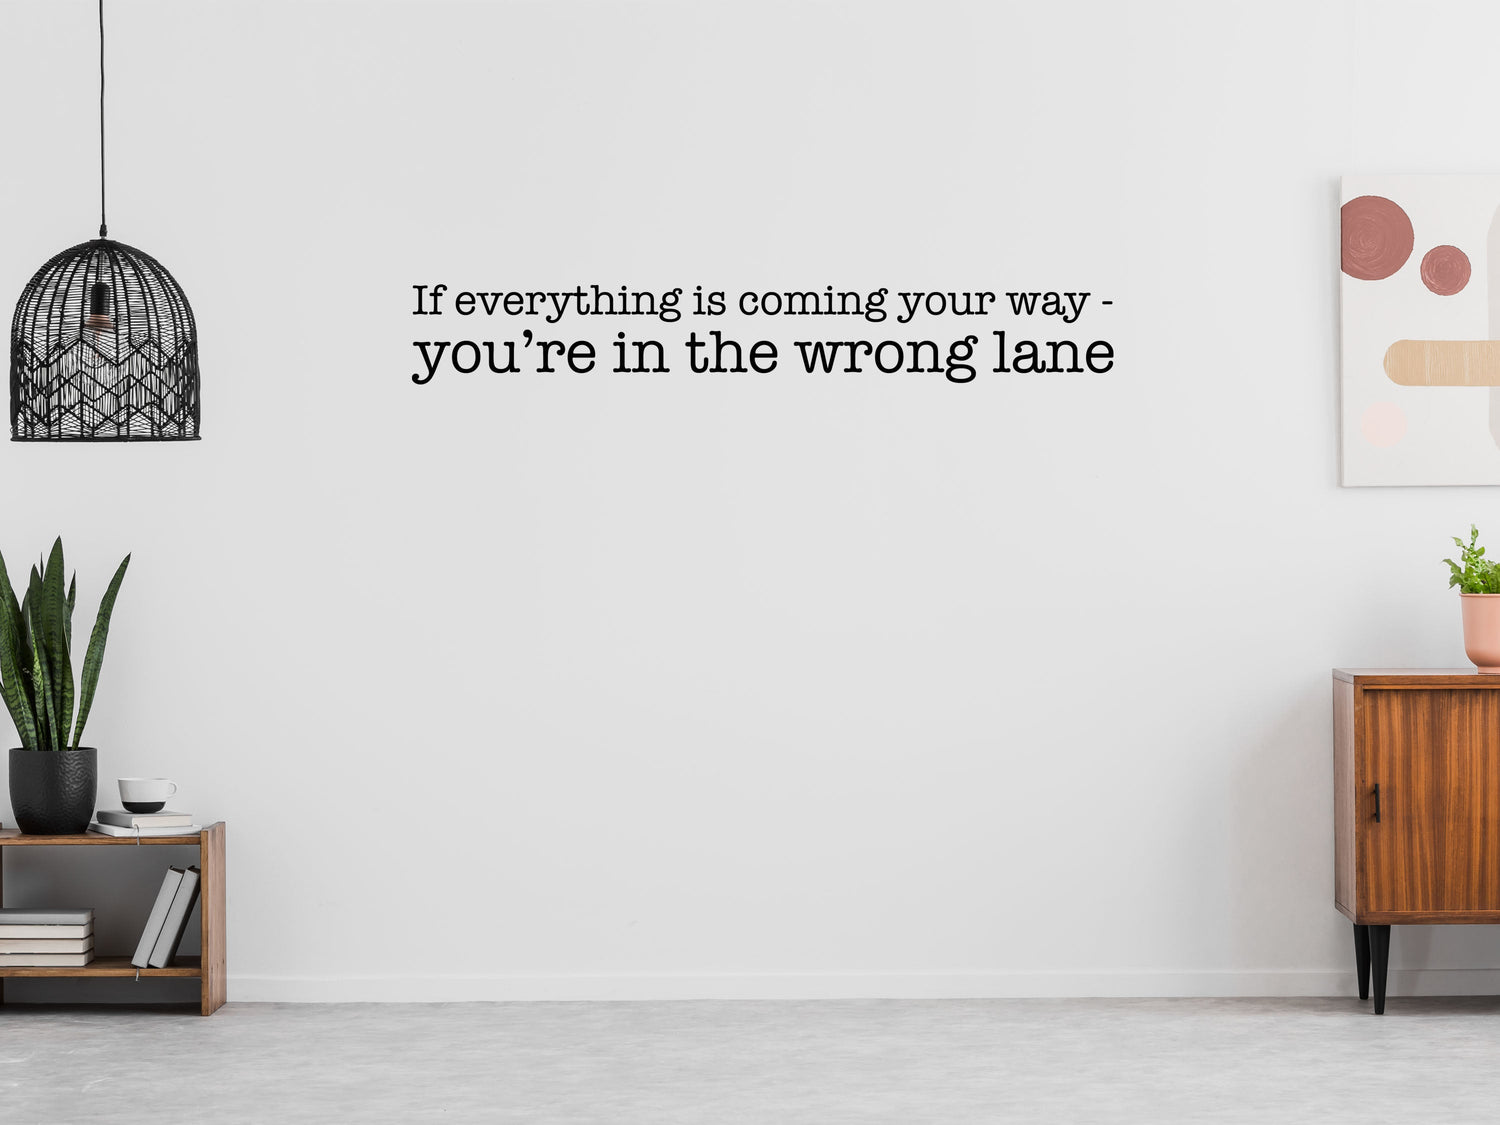 The Wrong Lane - Inspirational Wall Signs Vinyl Wall Decal Done 